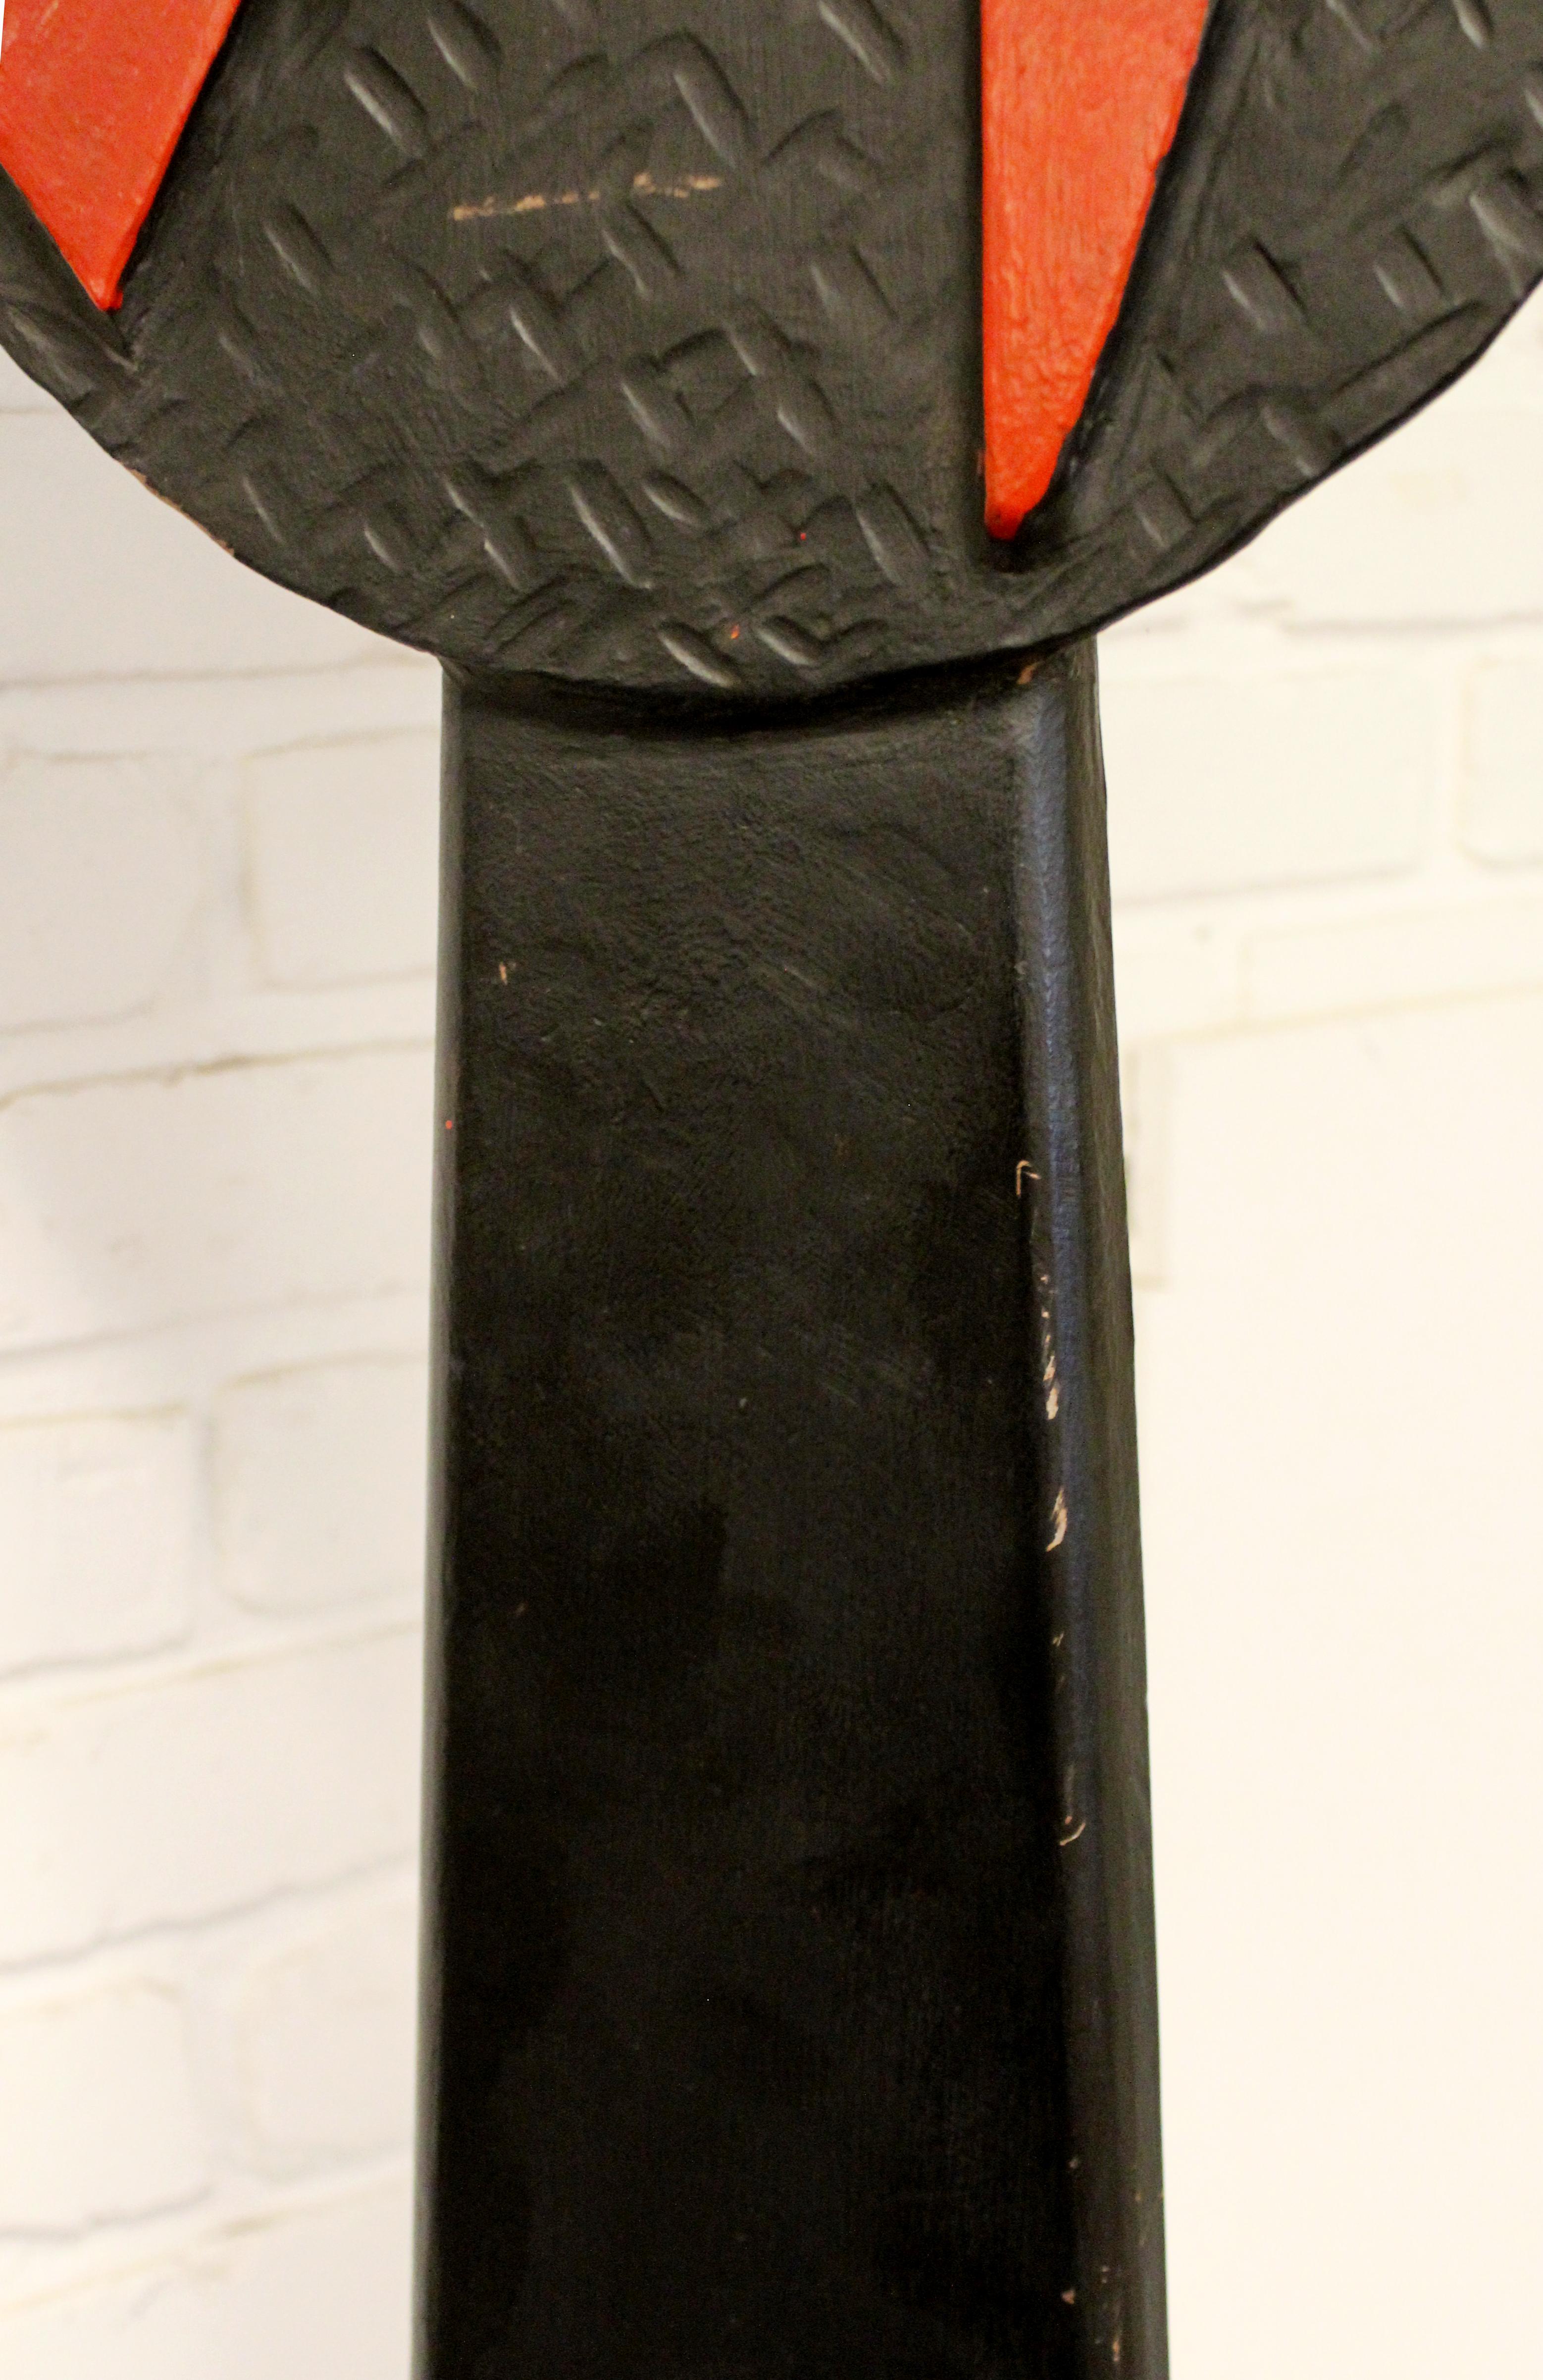 Contemporary Modernist Forged Black Red Metal Abstract Indoor Outdoor Floor Sculpture 2000s